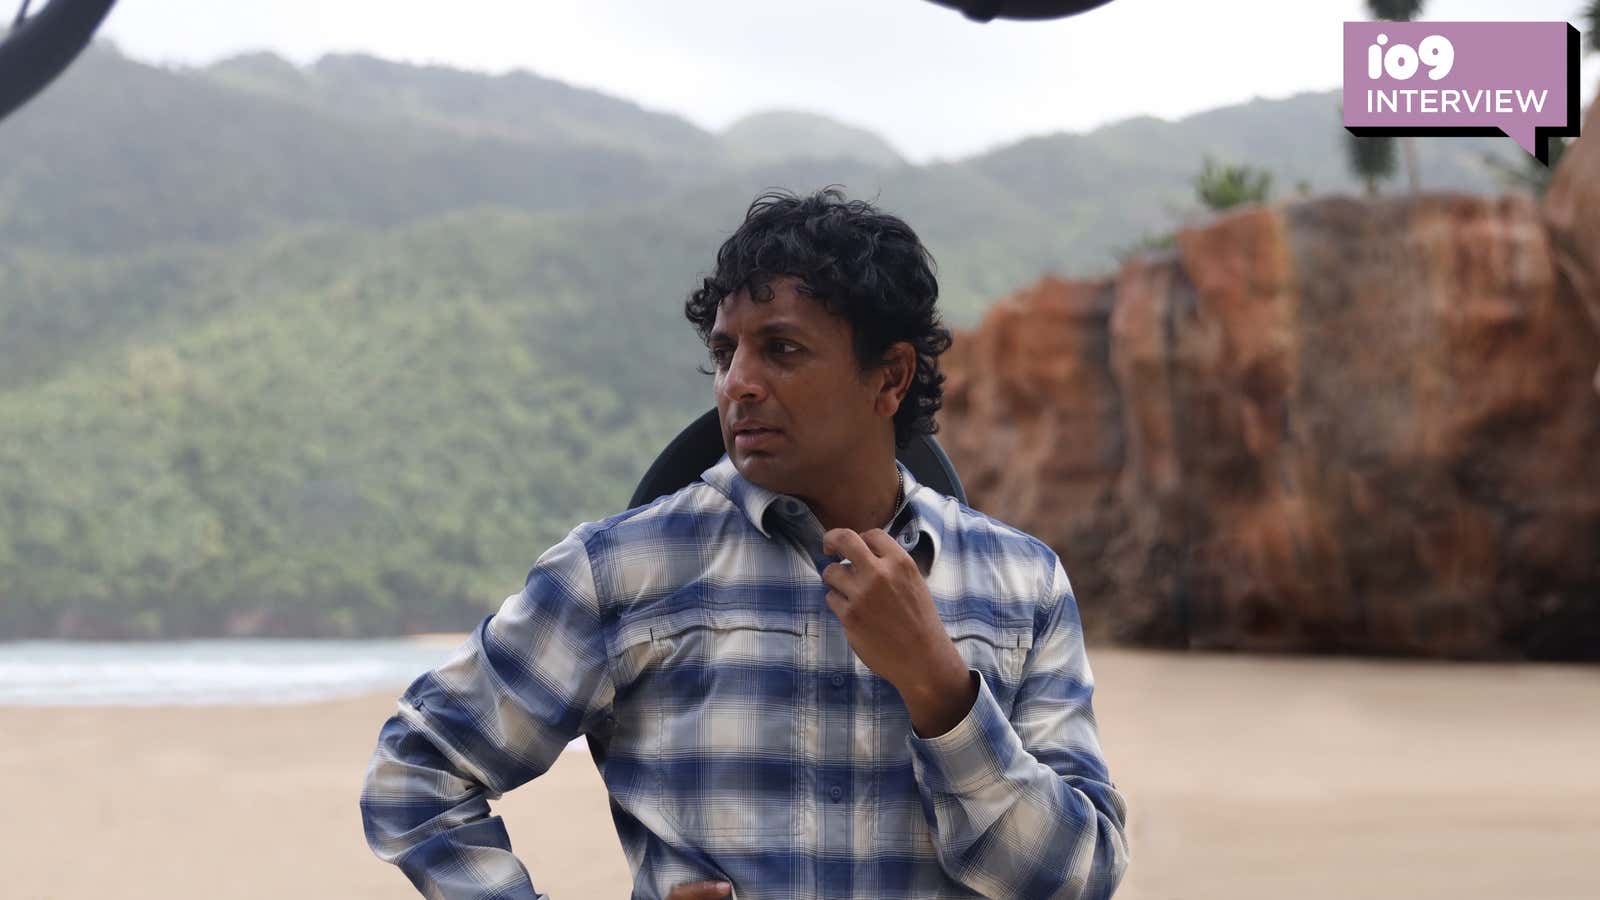 M. Night Shyamalan on location filming his new movie, Old.